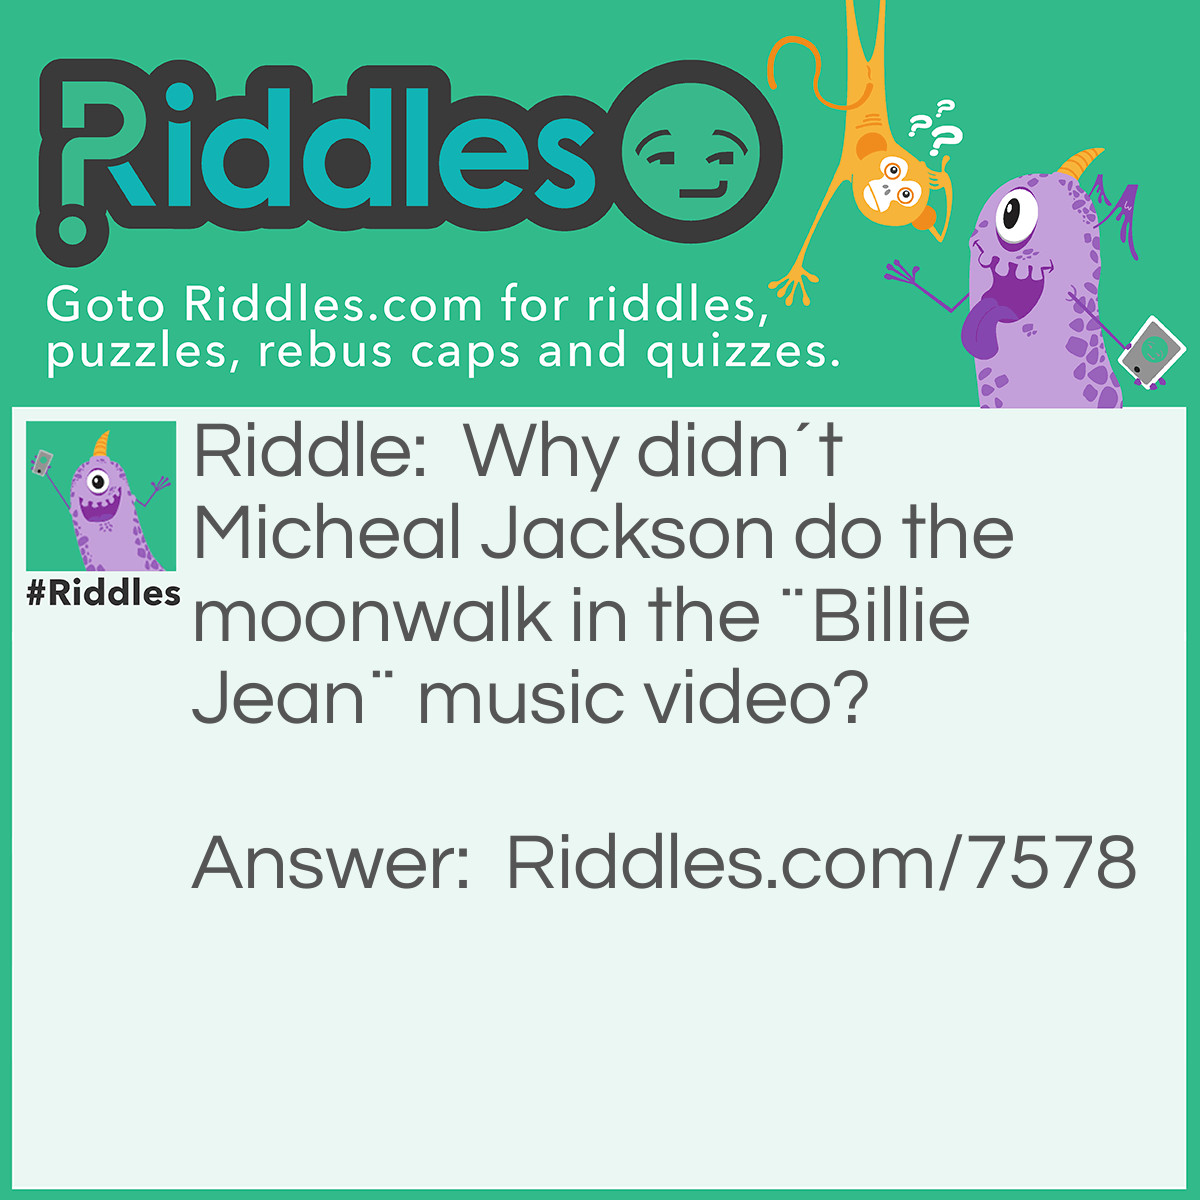 Riddle: Why didn´t Micheal Jackson do the moonwalk in the ¨Billie Jean¨ music video? Answer: He was too busy being chased by a inspector.